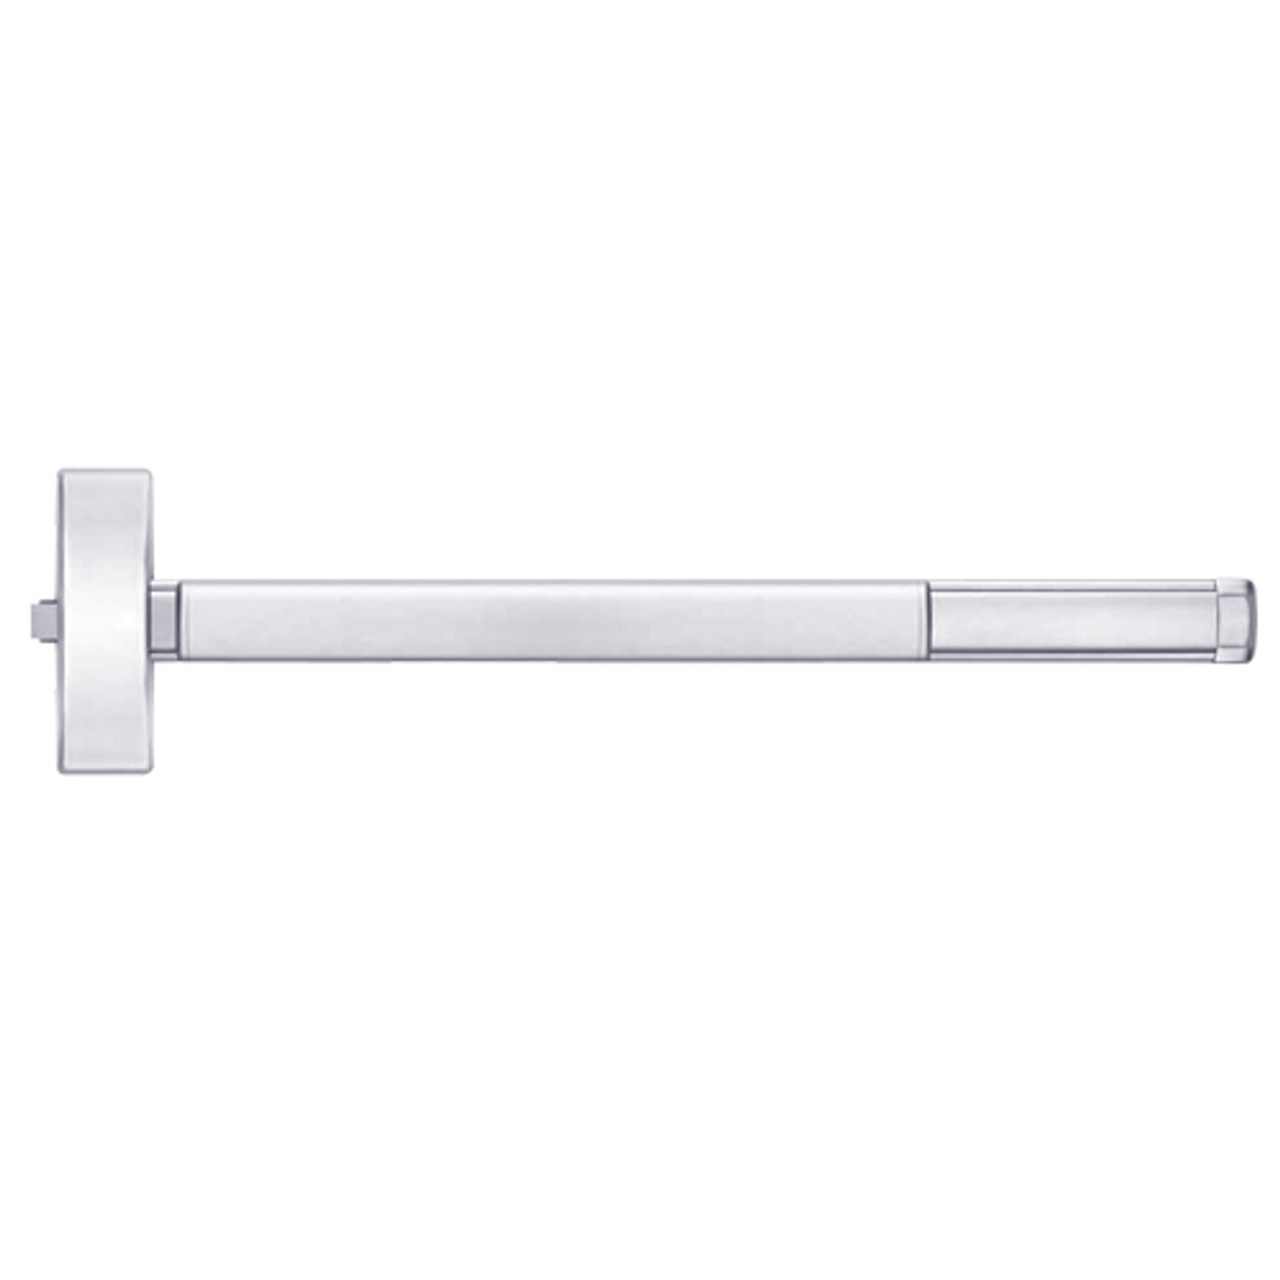 MLRFL2115-625-48 PHI 2100 Series Fire Rated Apex Rim Exit Device with Motorized Latch Retraction Prepped for Thumb Piece Always Active in Bright Chrome Finish